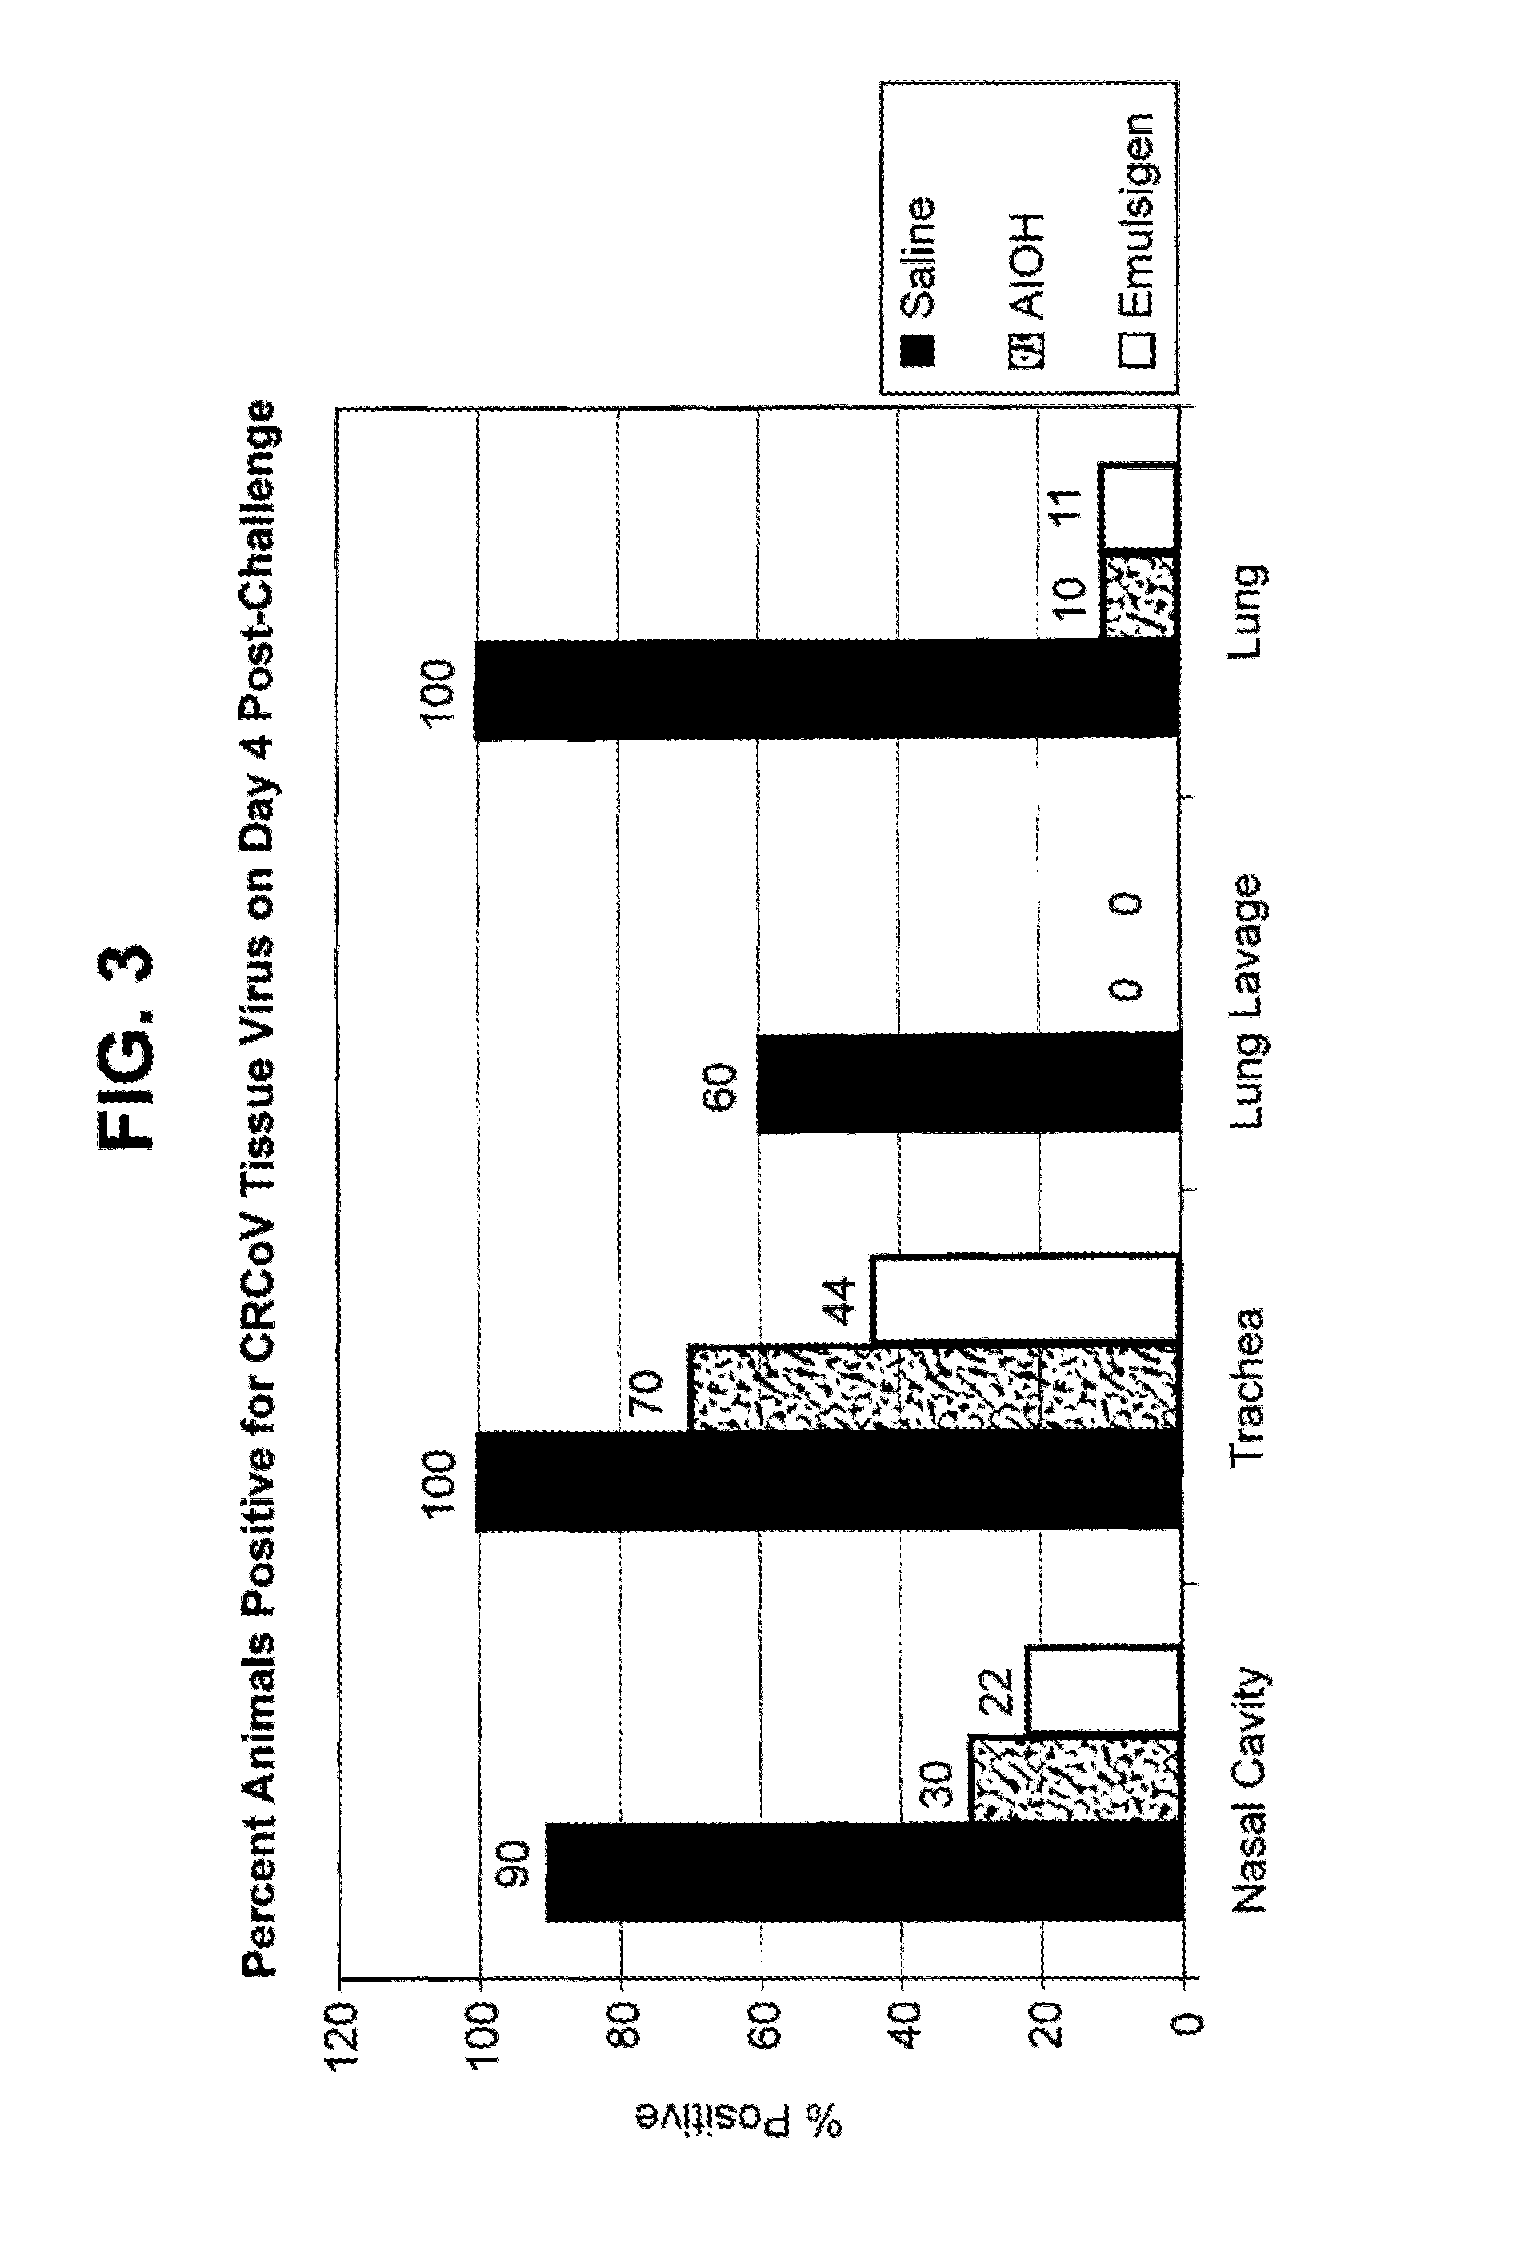 Compositions for canine respiratory disease complex